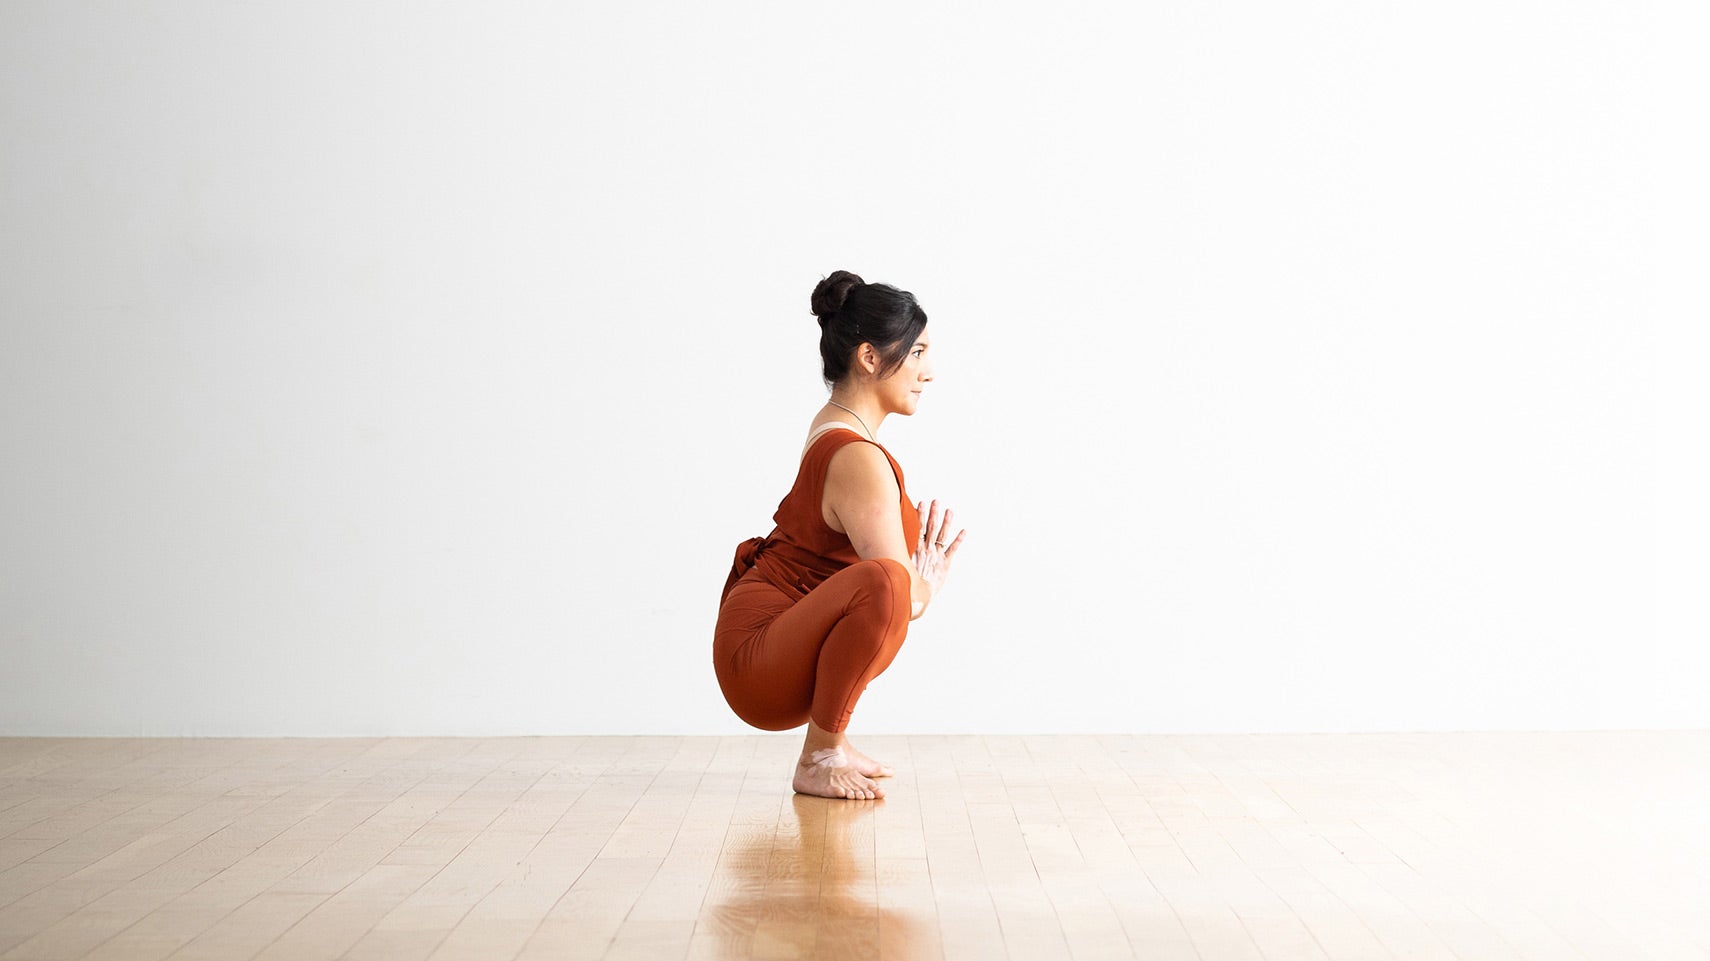 10 Yoga Poses to Do Every Day in You Home Practice